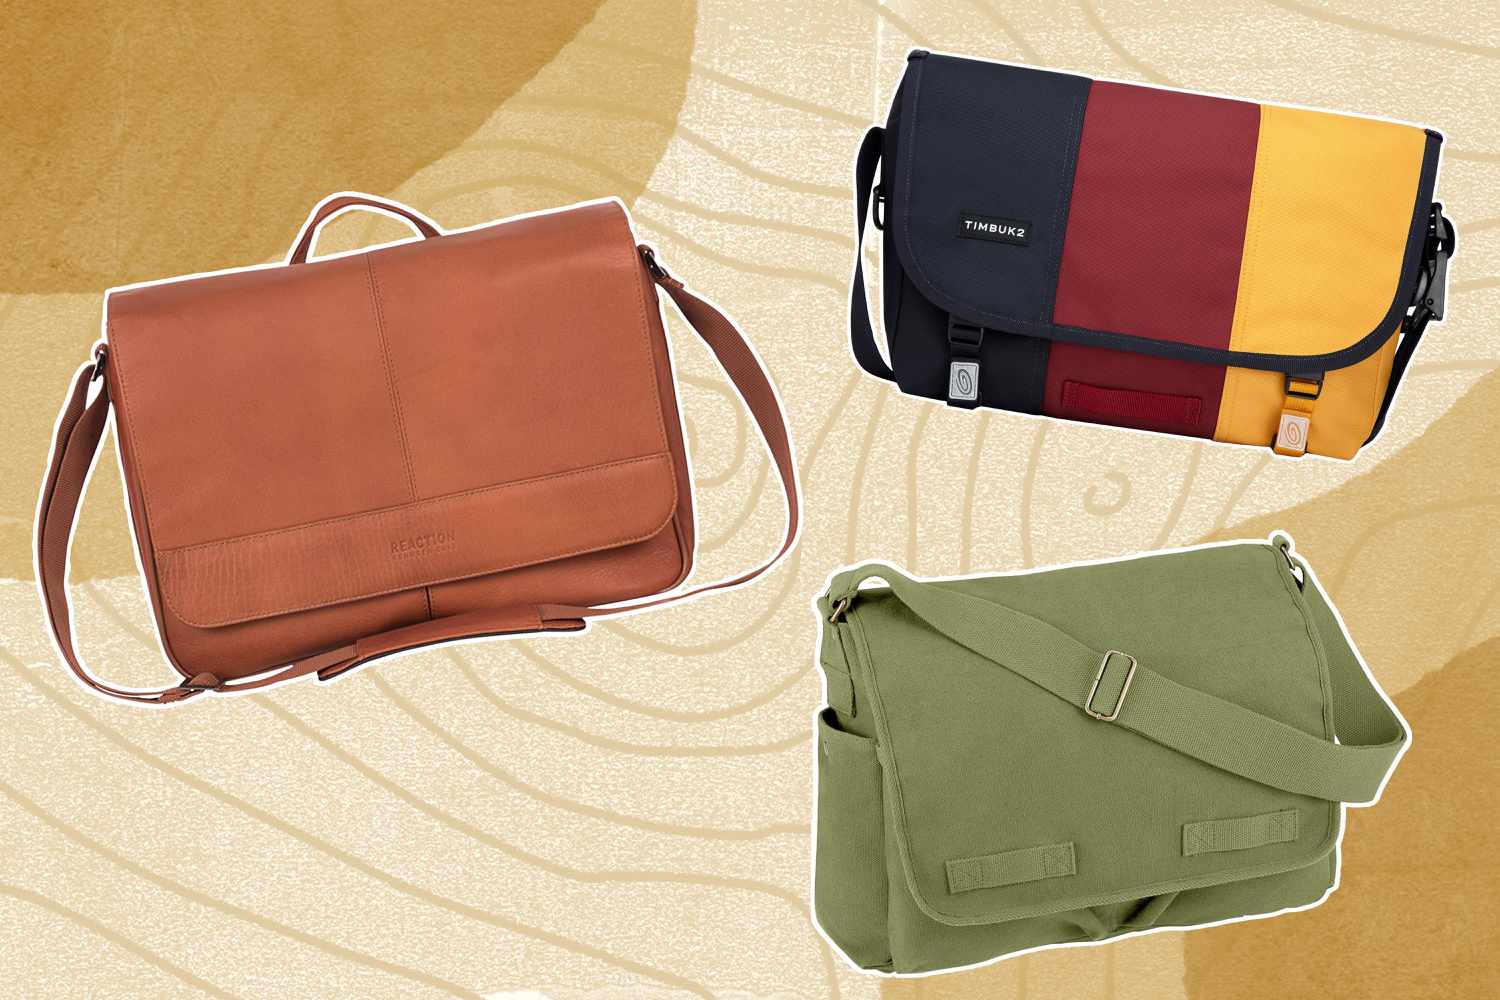 New Brand Alert: Stylish Messenger Bags to Check Out